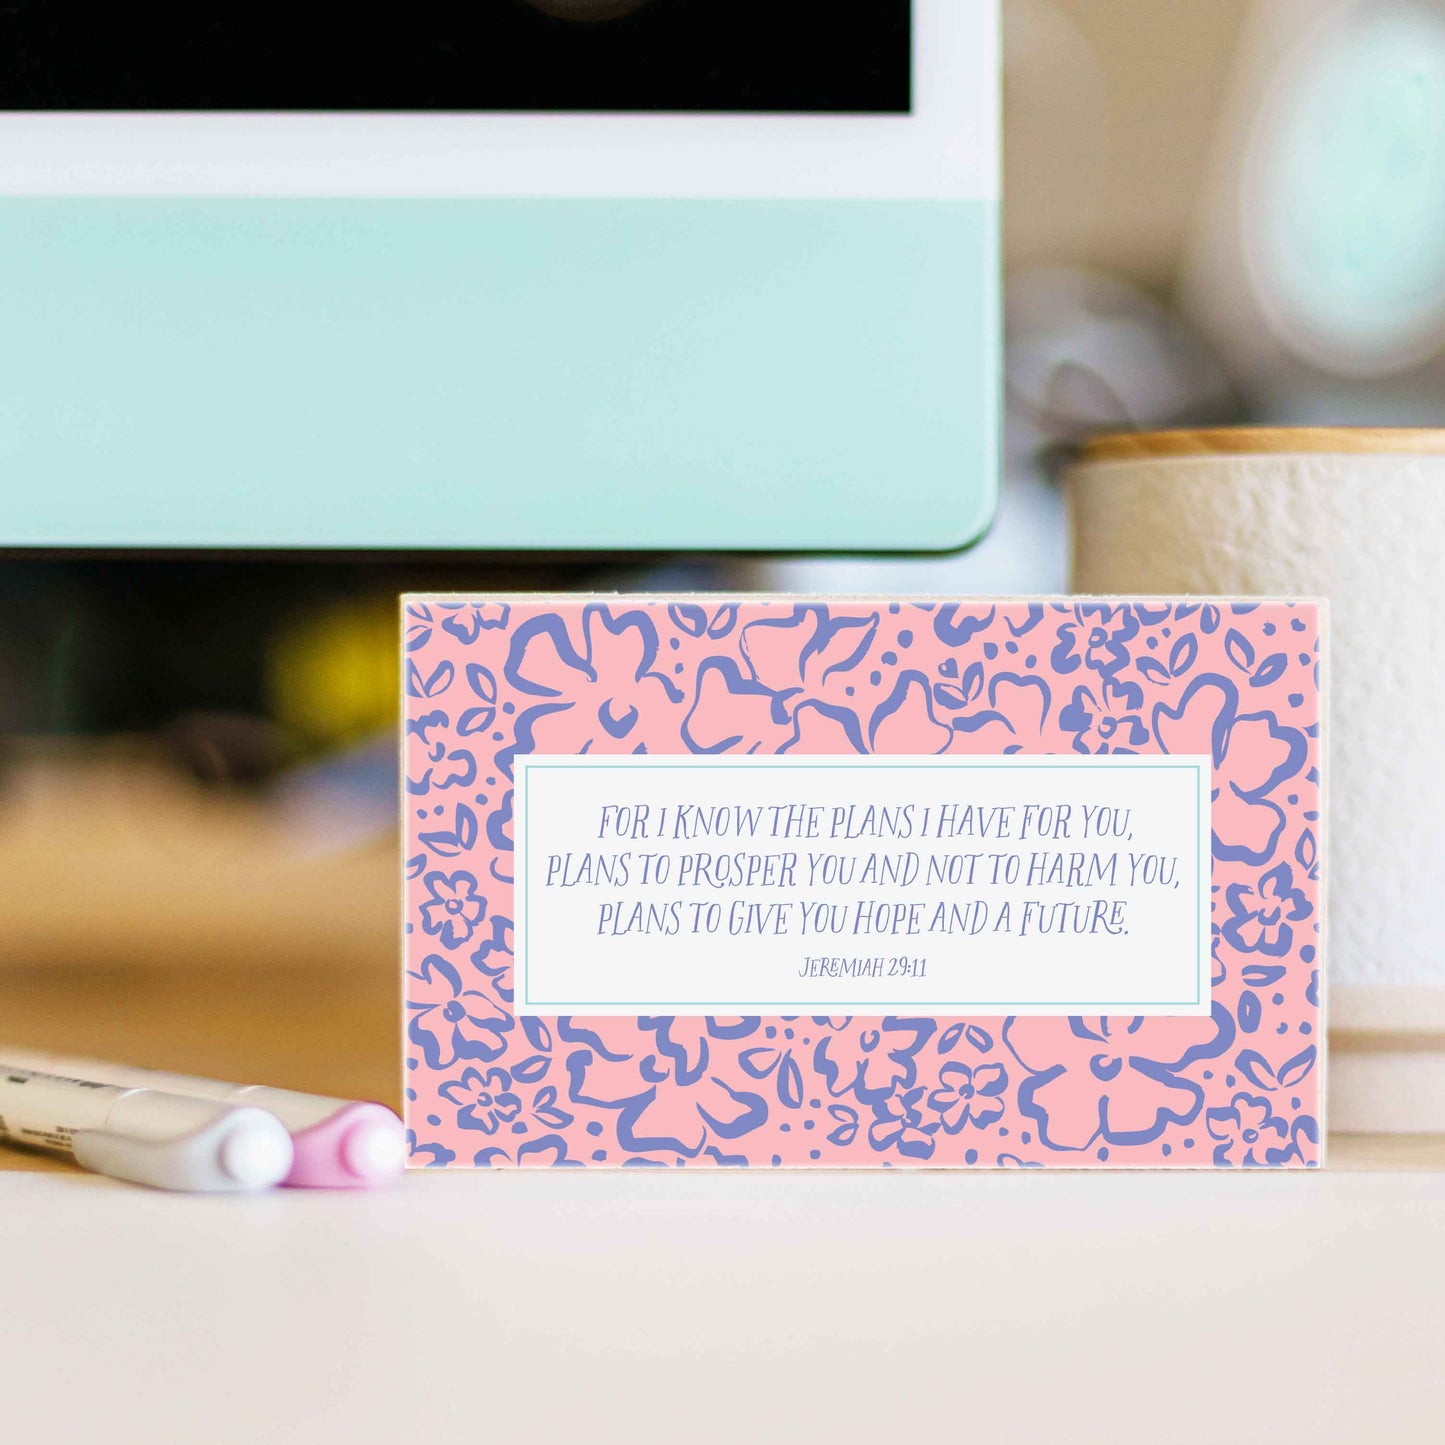 Fearless Faith Desk Sign - For I know the plans I have for you